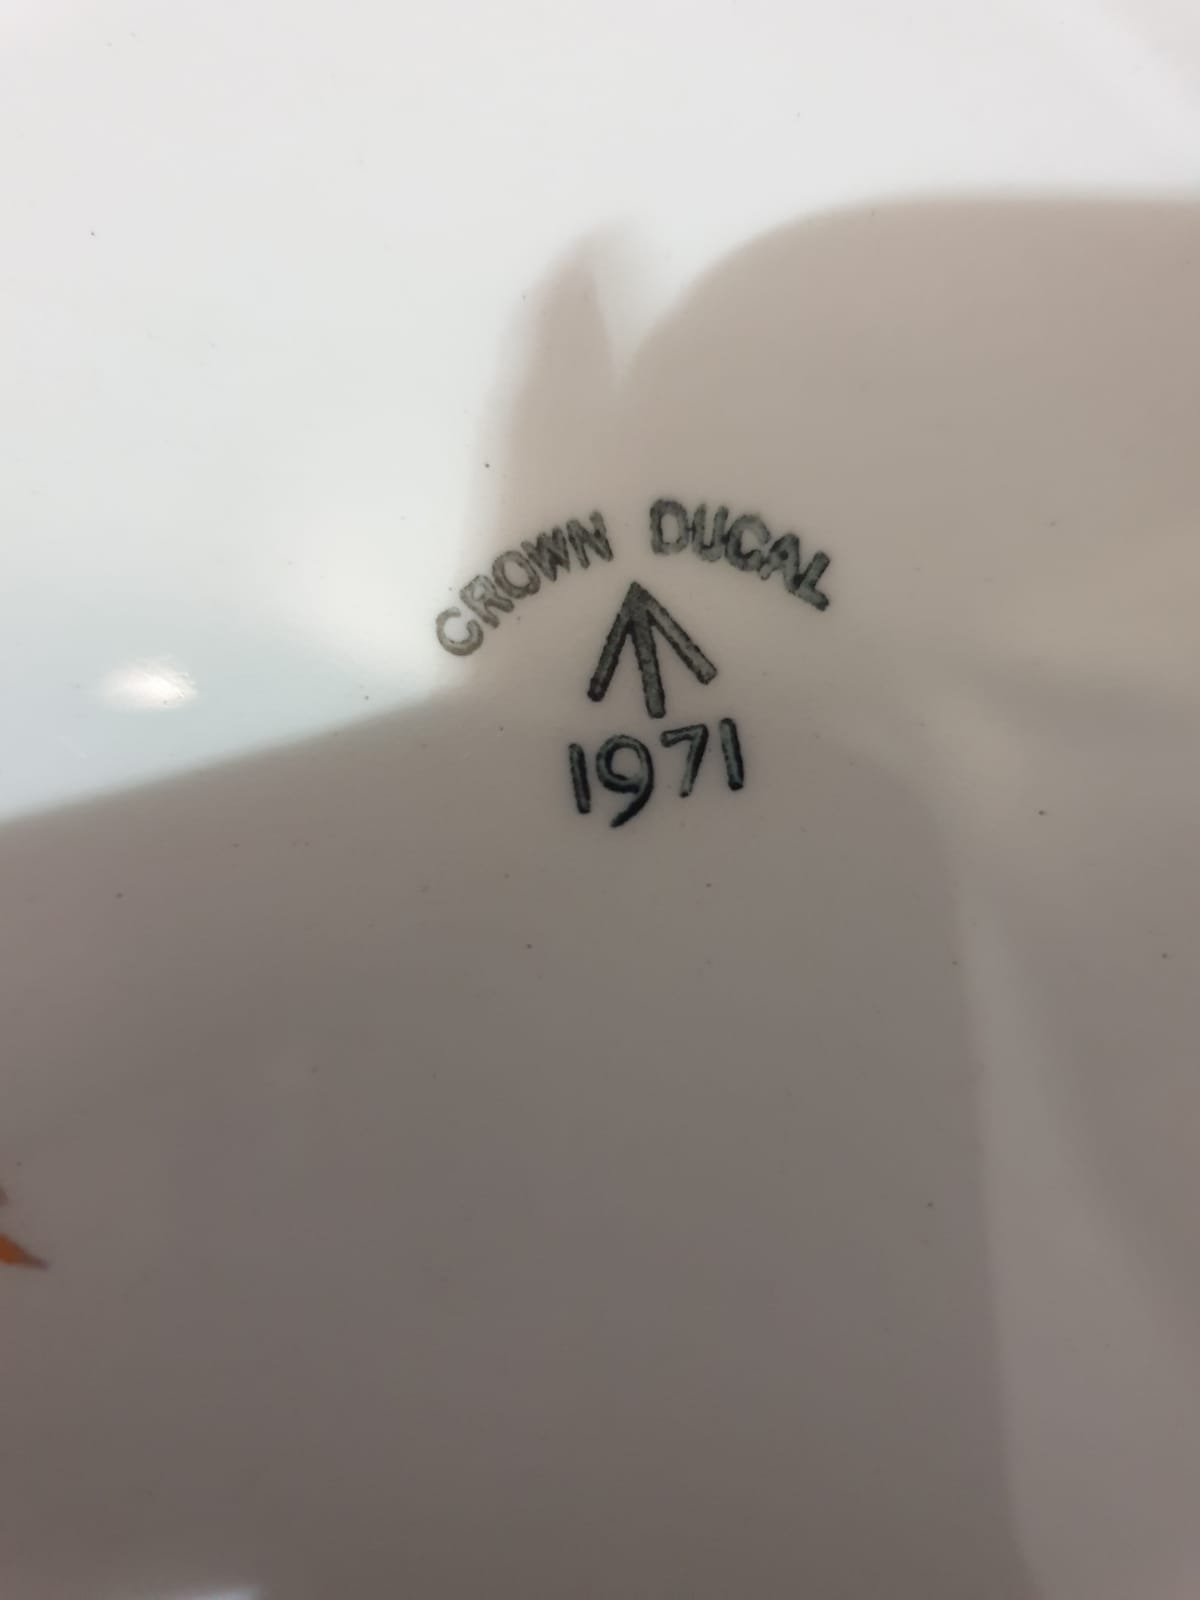 13 x Crown Ducal England Dinner plates White Gold rim 1971 - Image 3 of 3